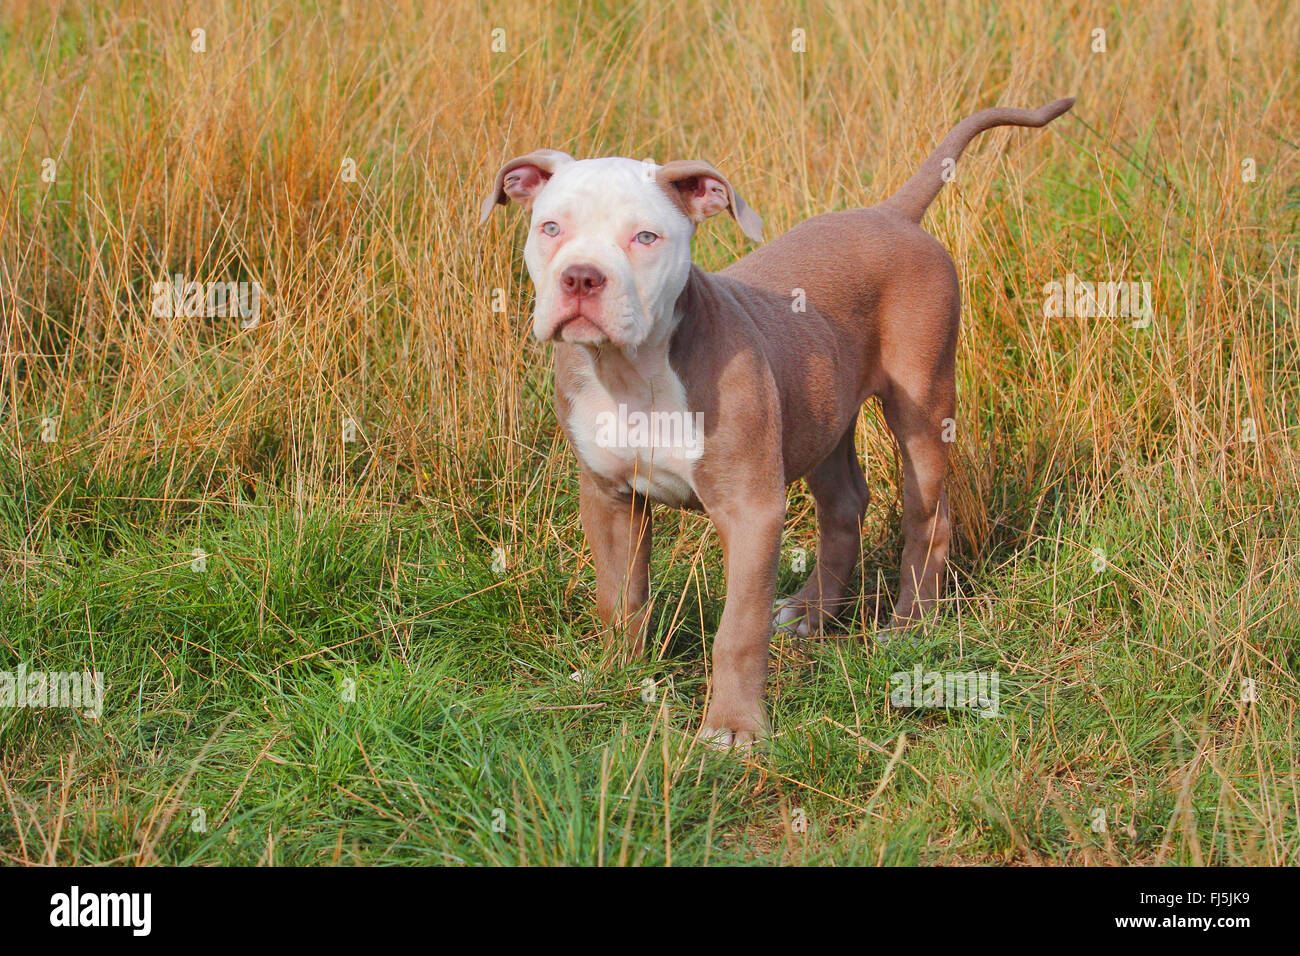 Olde English Bulldog (Canis lupus f. familiaris), twelve weaks old puppy standing in a meadow, Germany Stock Photo